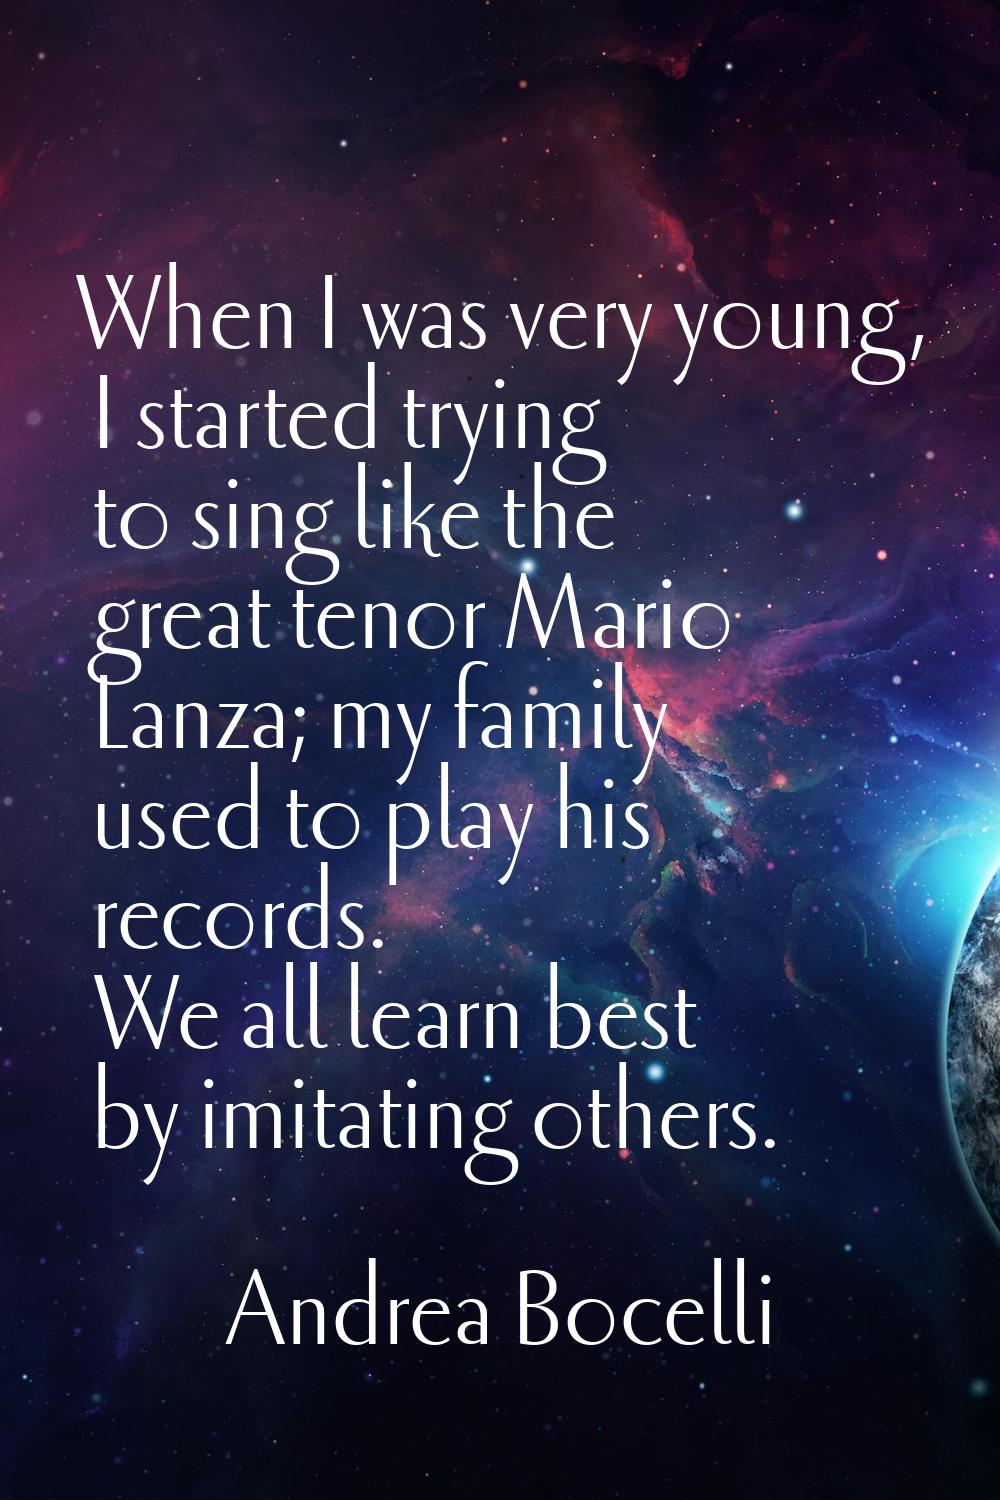 When I was very young, I started trying to sing like the great tenor Mario Lanza; my family used to